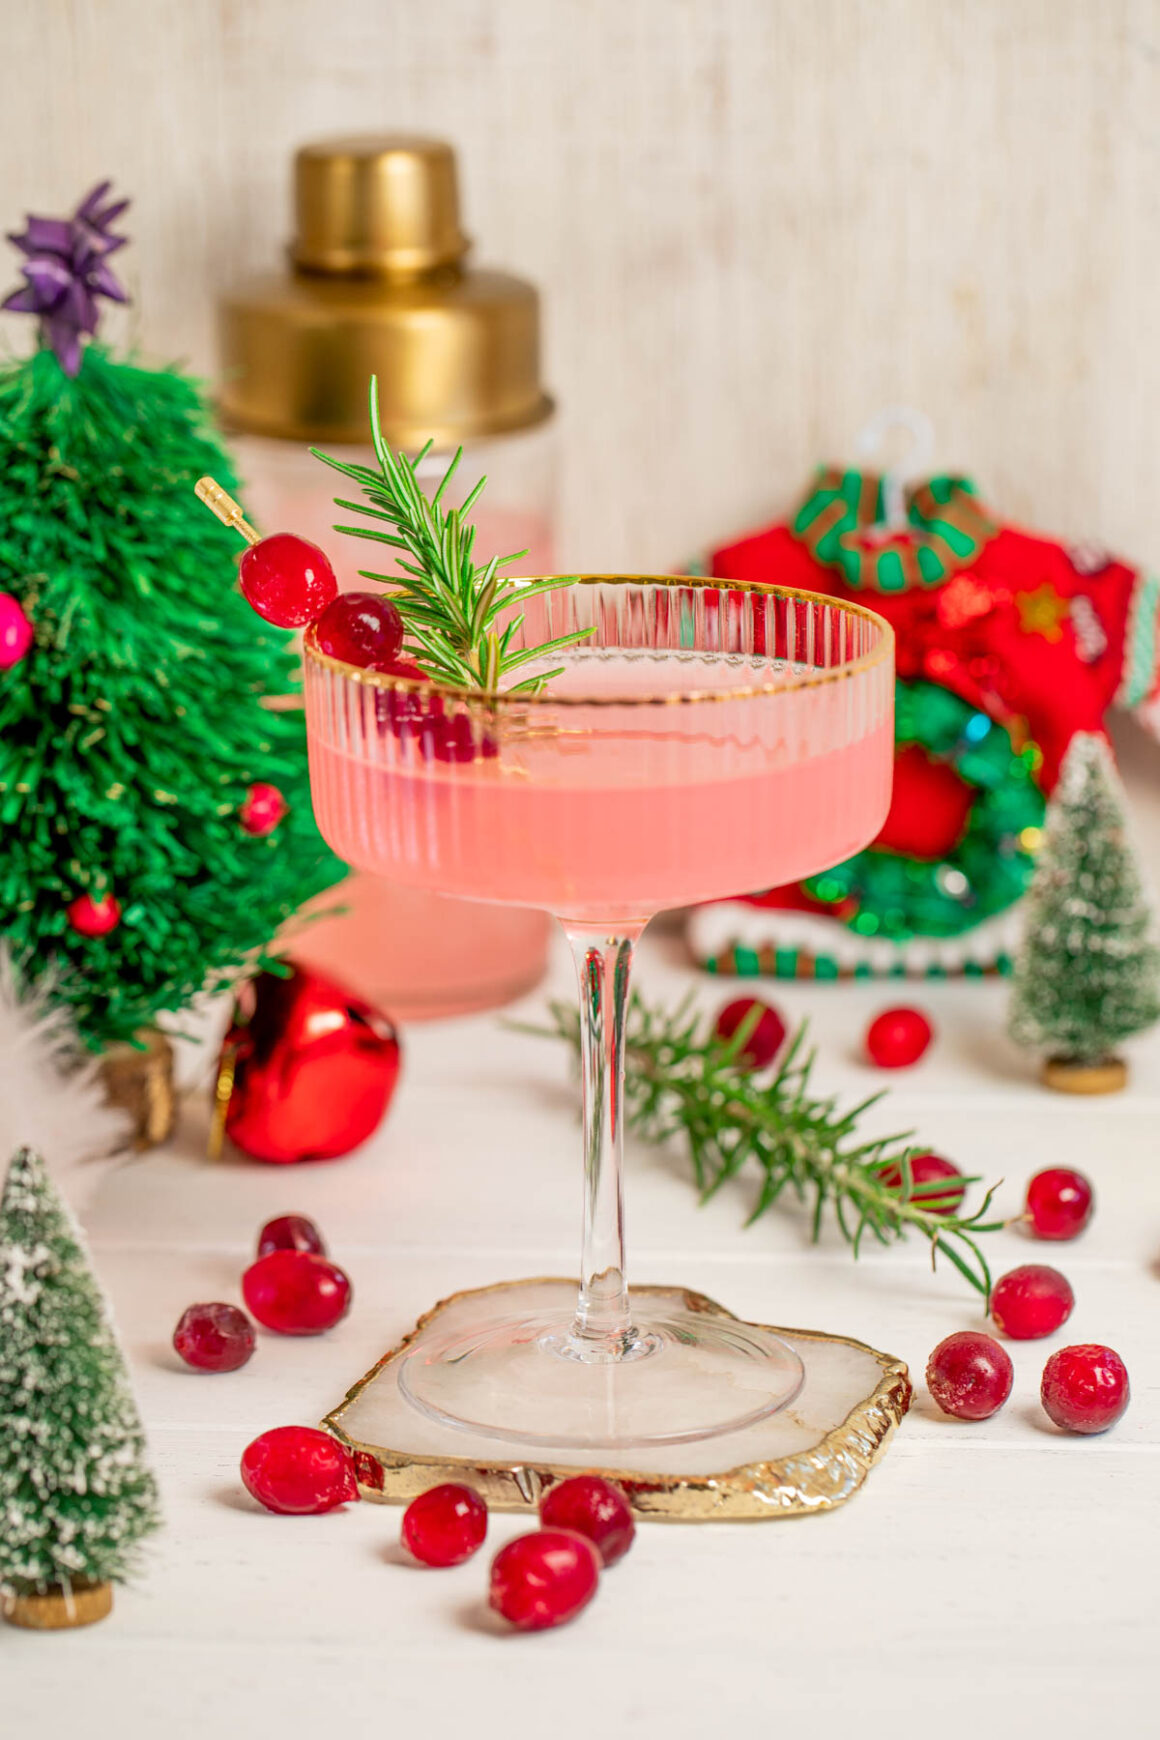 Use This Herb to Put a Christmas Tree In Your Holiday Party Drink